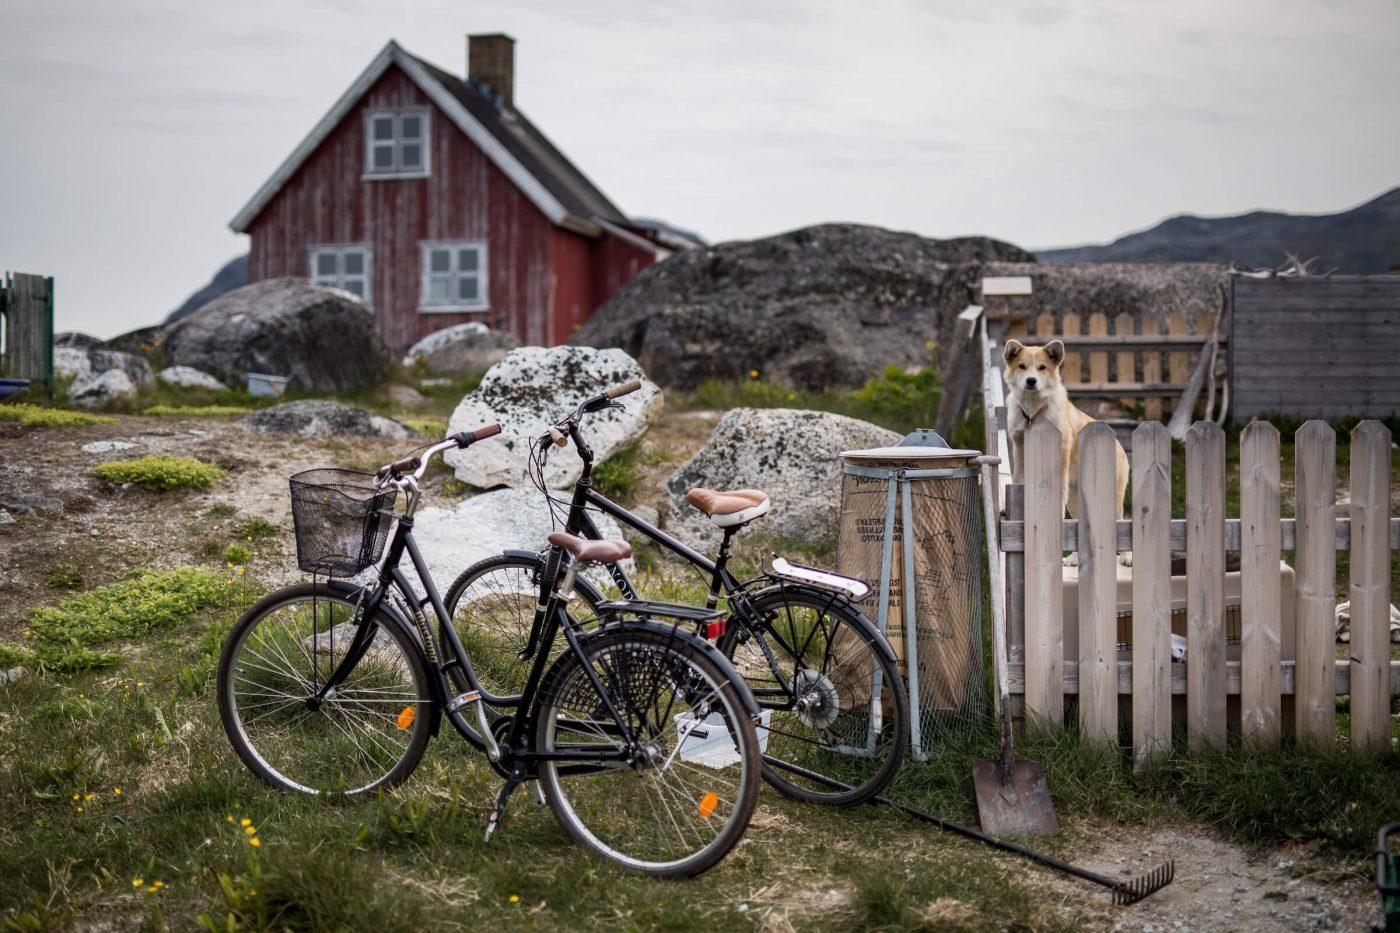 Two bikes parked outside a house in Nanortalik while a dog stares at the photographer in South Greenland. Photo by Mads Pihl.